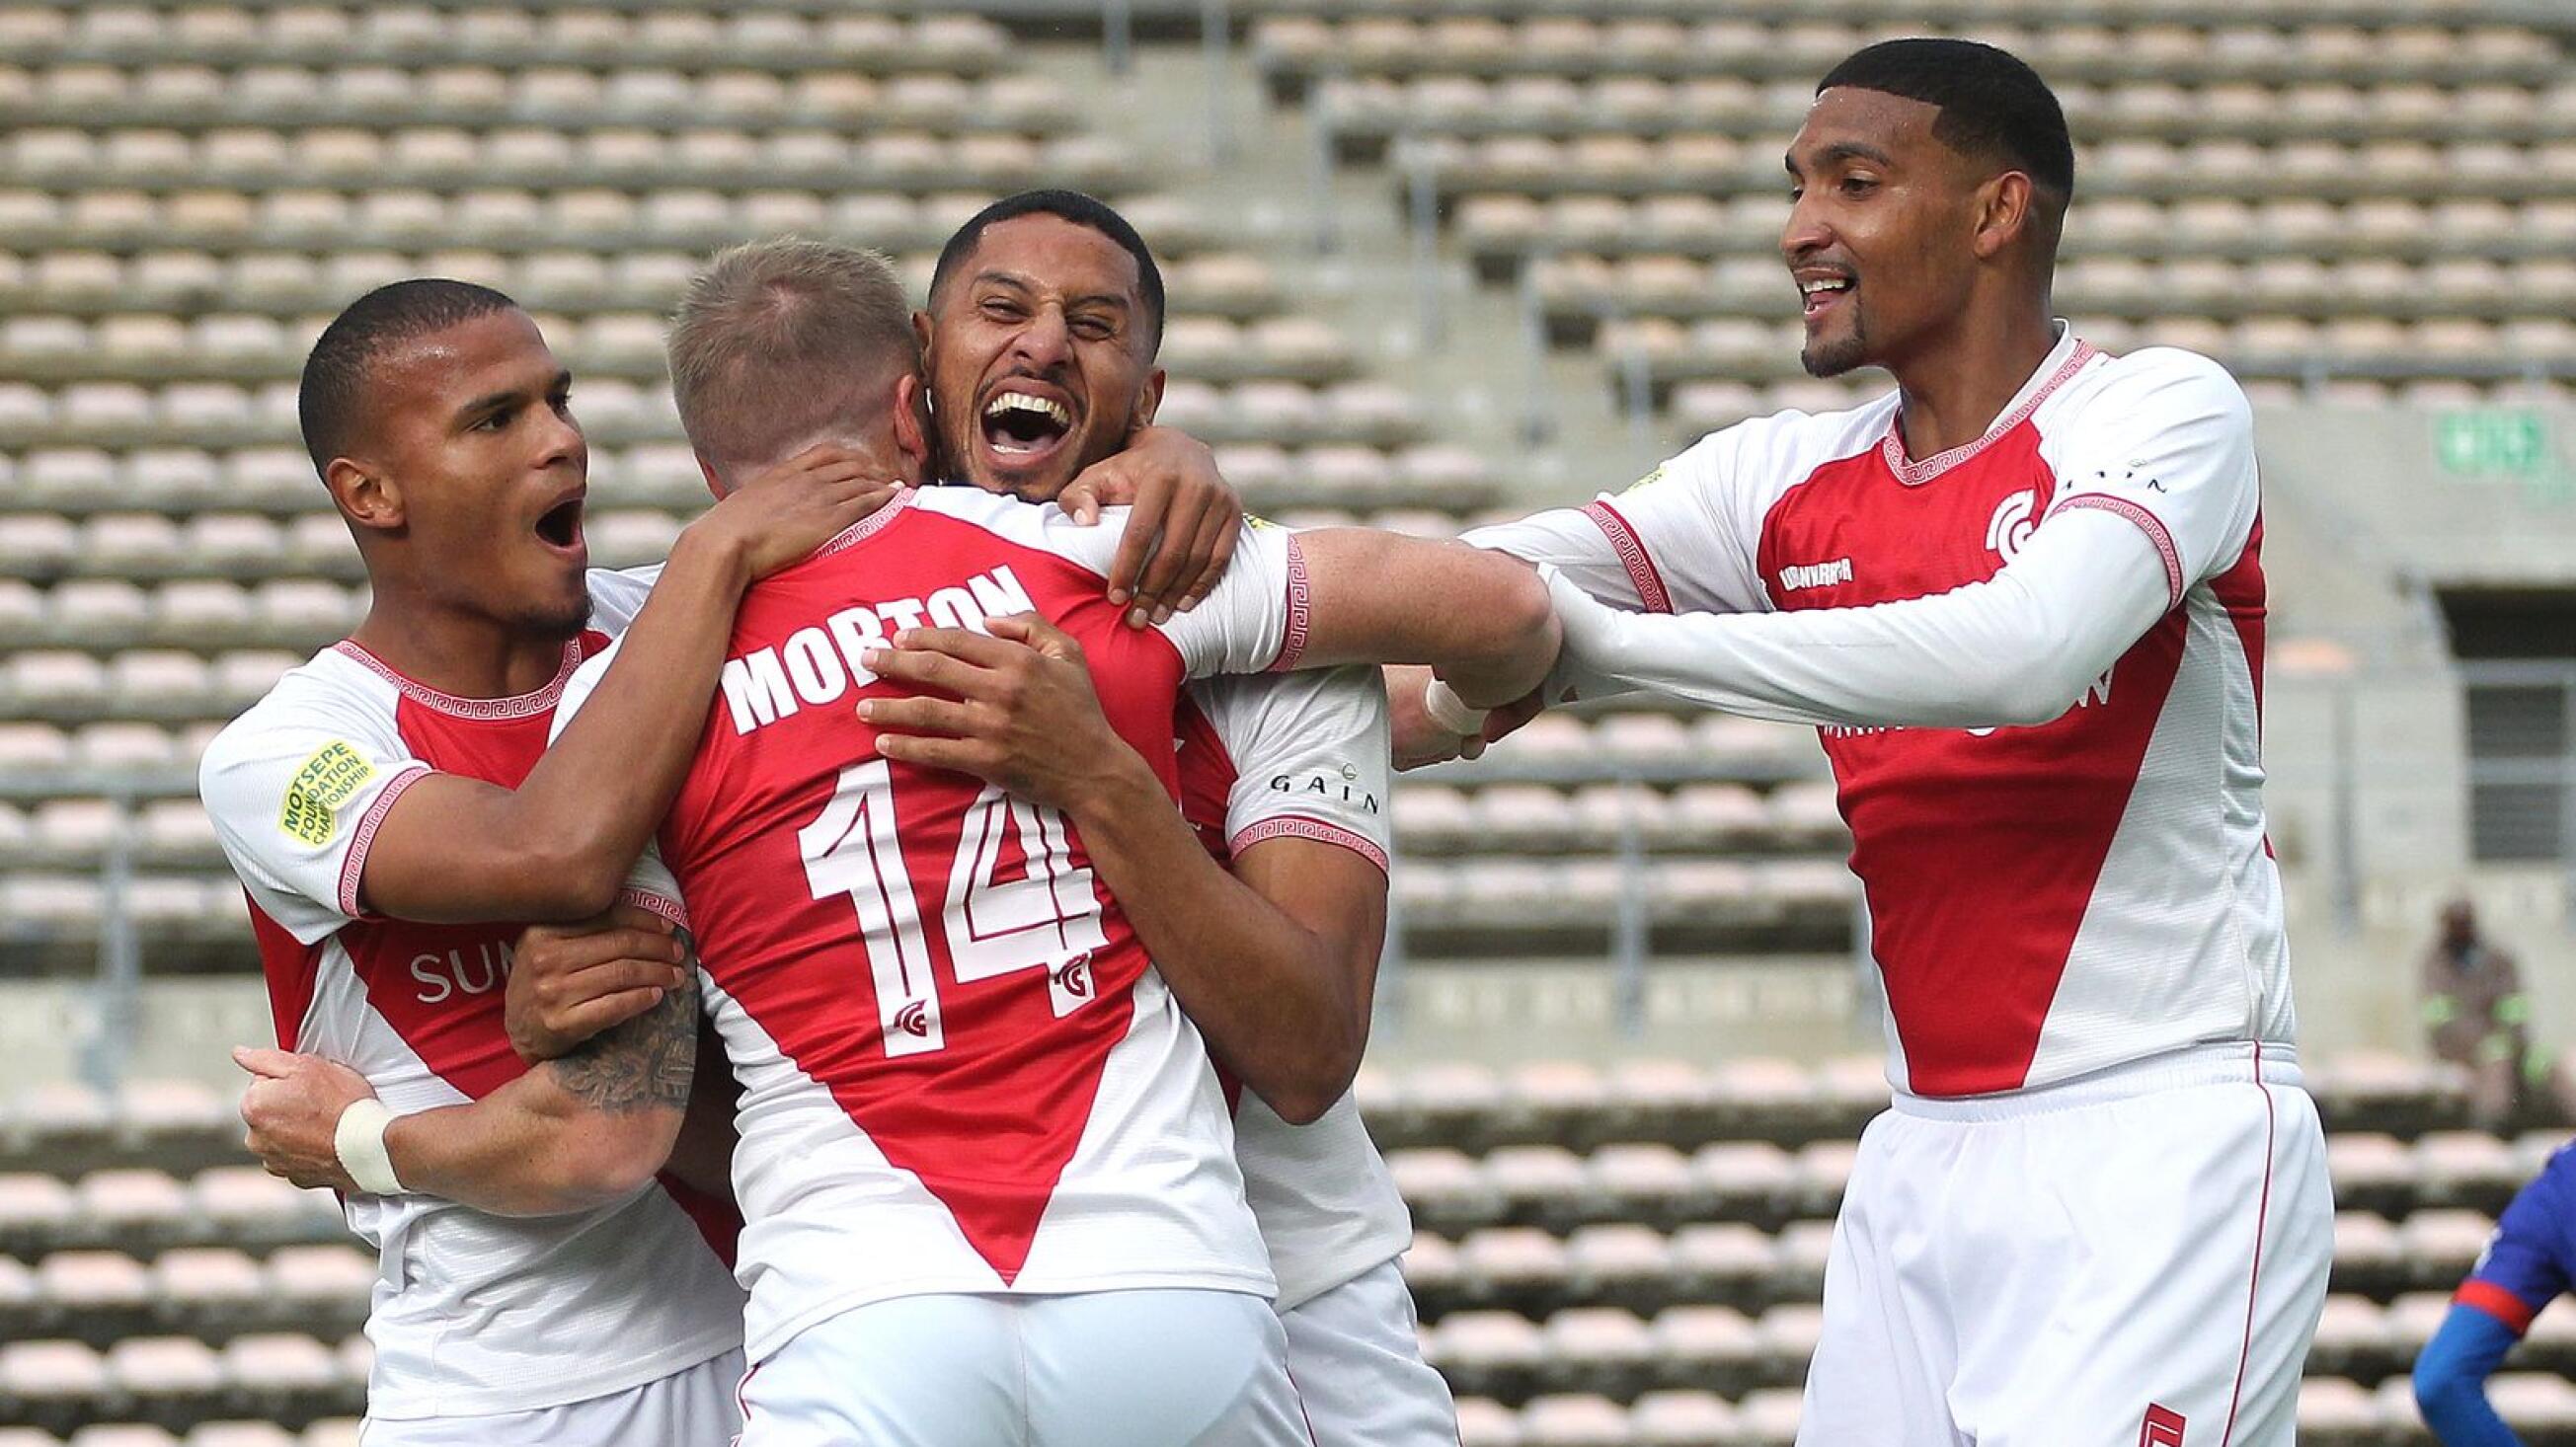 Cape Town Spurs’ Michael Morton celebrates with teammates after scoring the winning goal in their promotion/relegation play-off against Maritzburg United at Athlone Stadium in Cape Town Spurs on Saturday